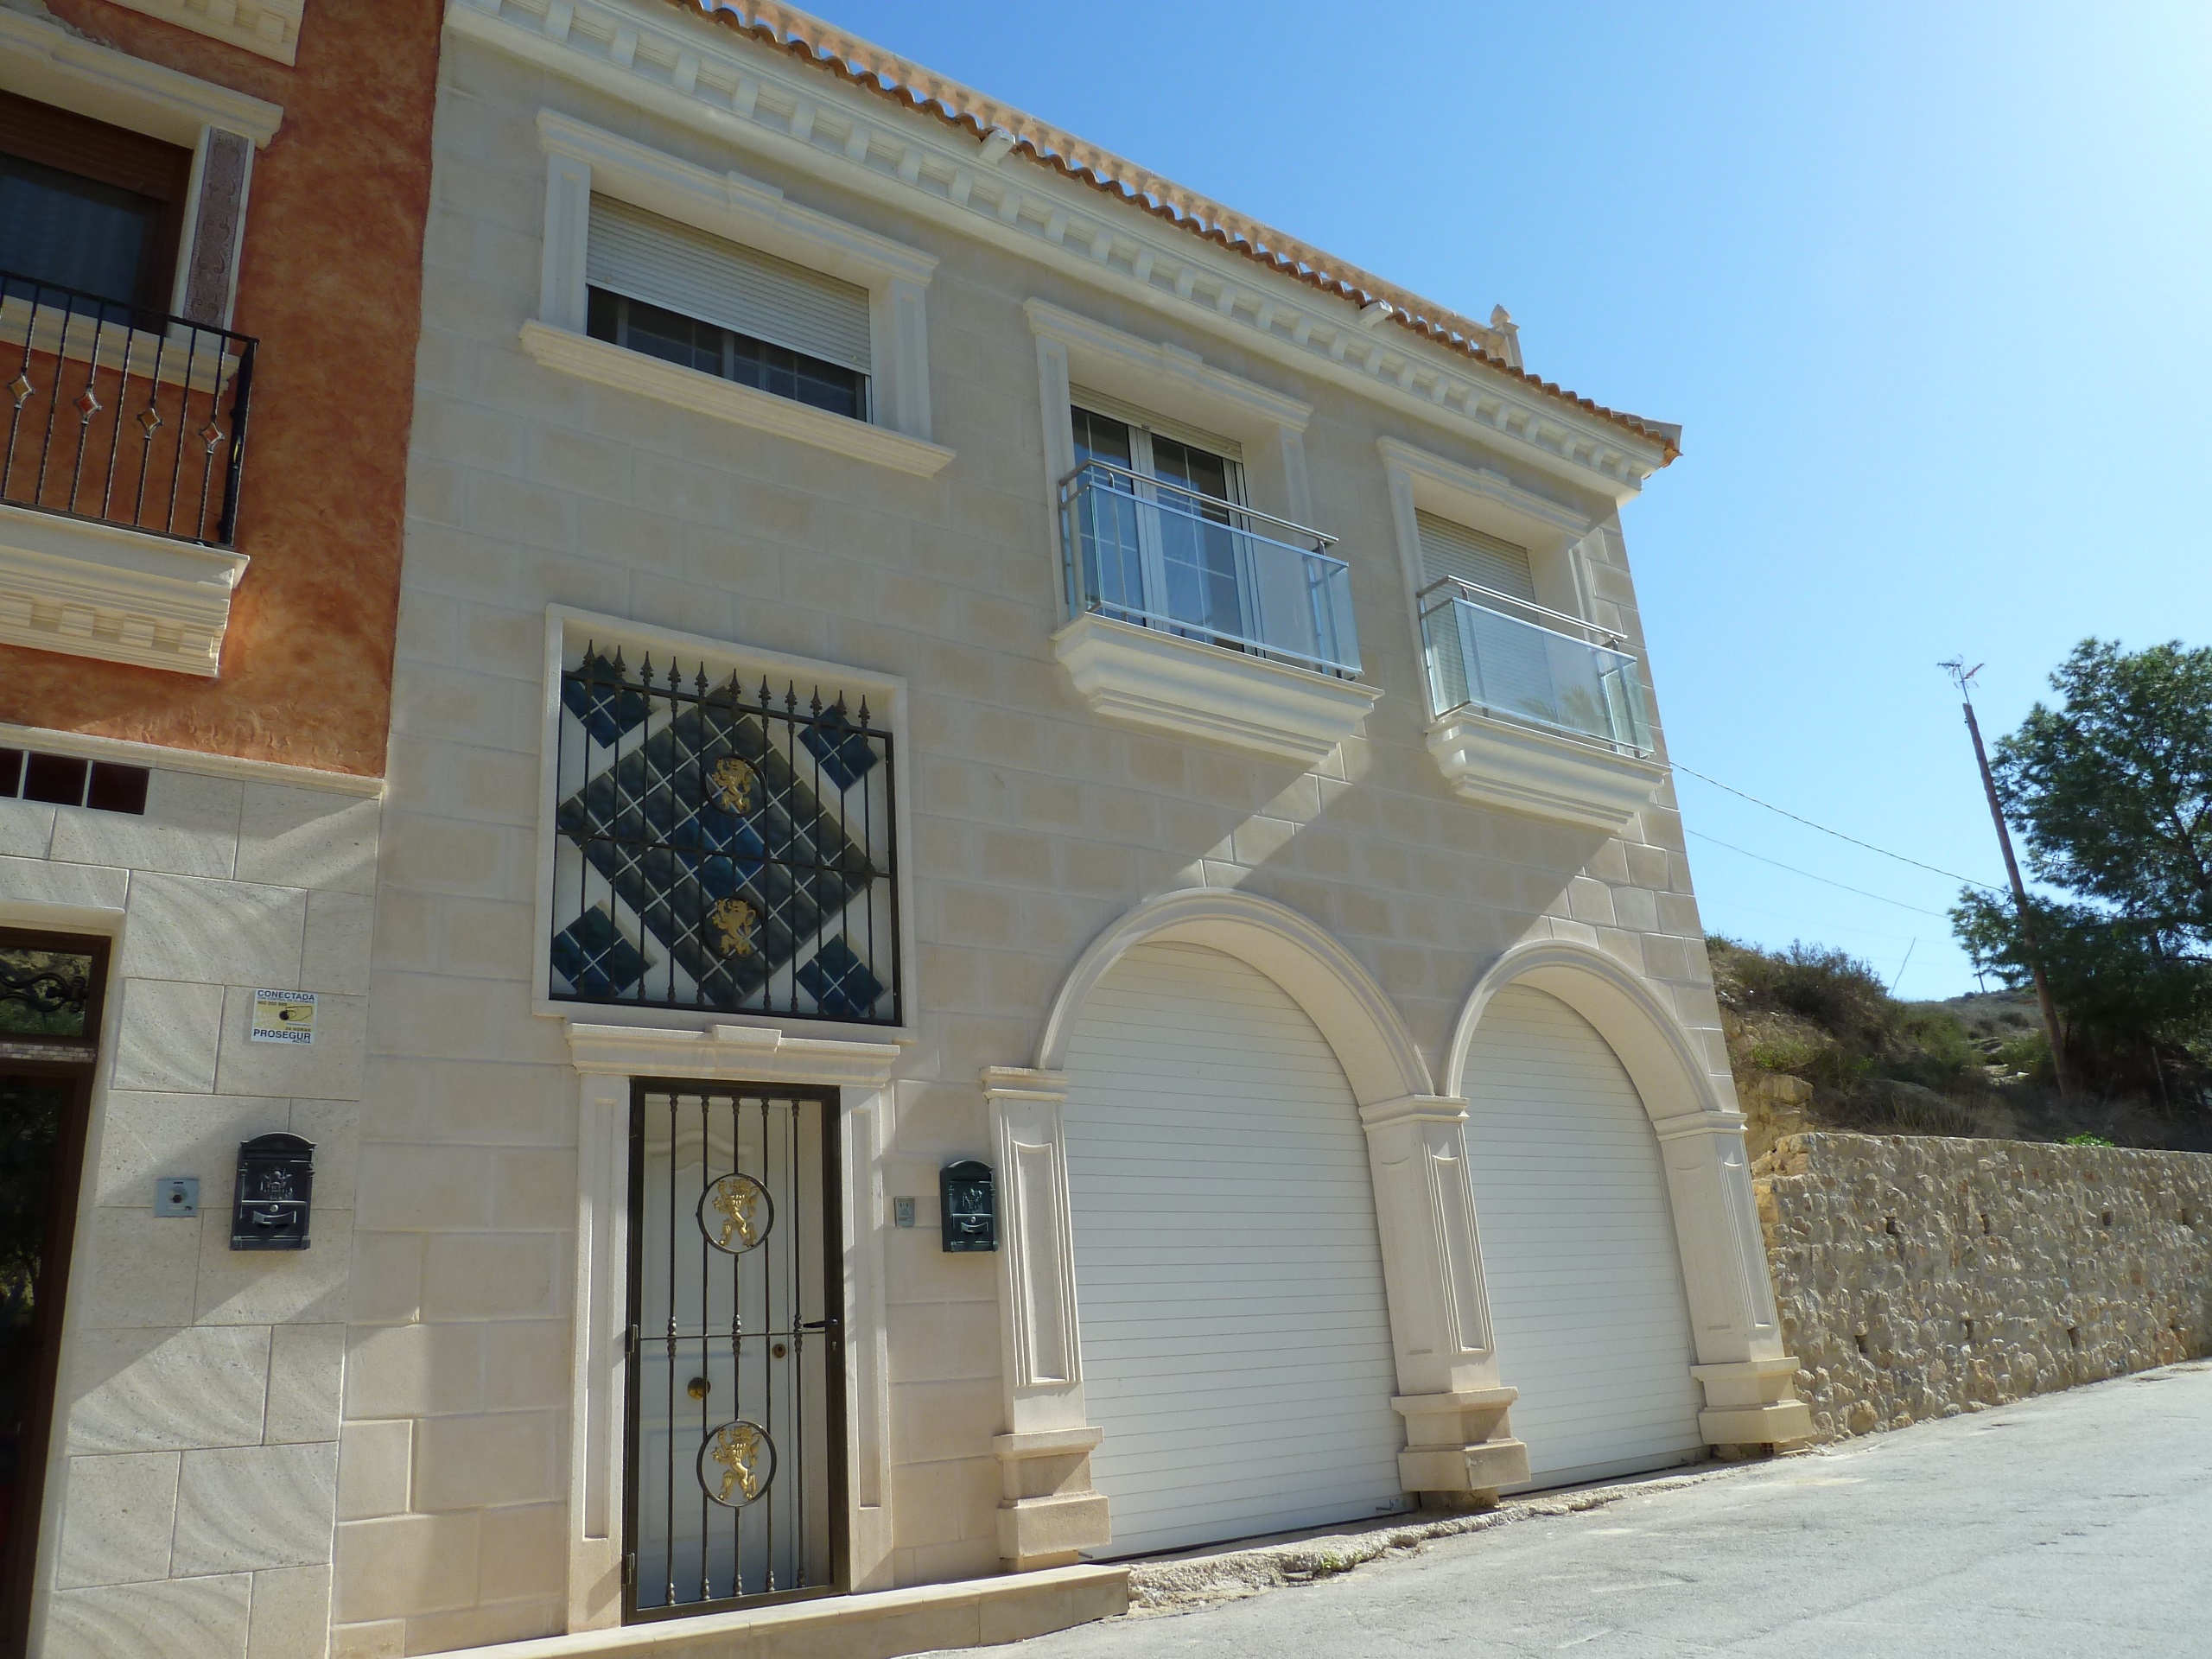 Qlistings - 3 Bedroom Semi Detached Villa For Sale In Rojales Property Image